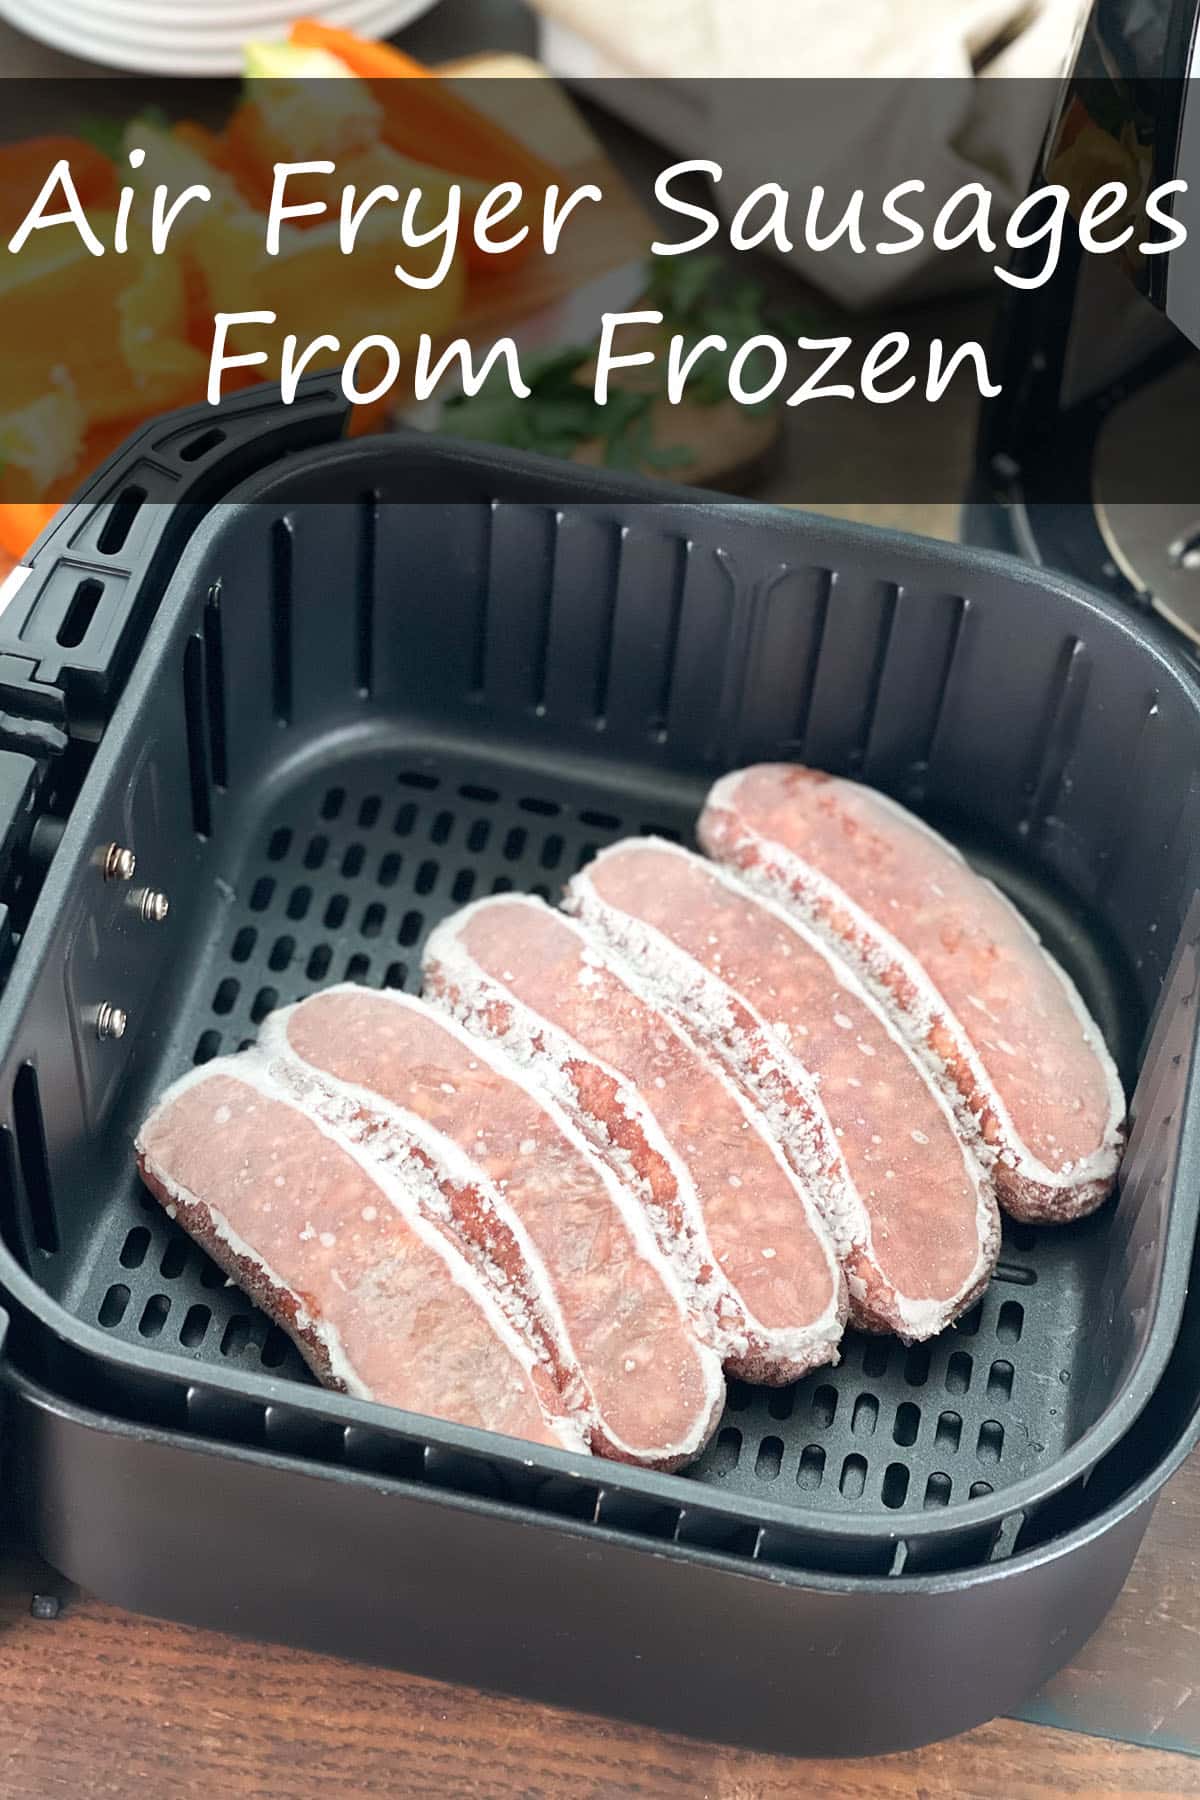 Air Fryer Sausages From Frozen